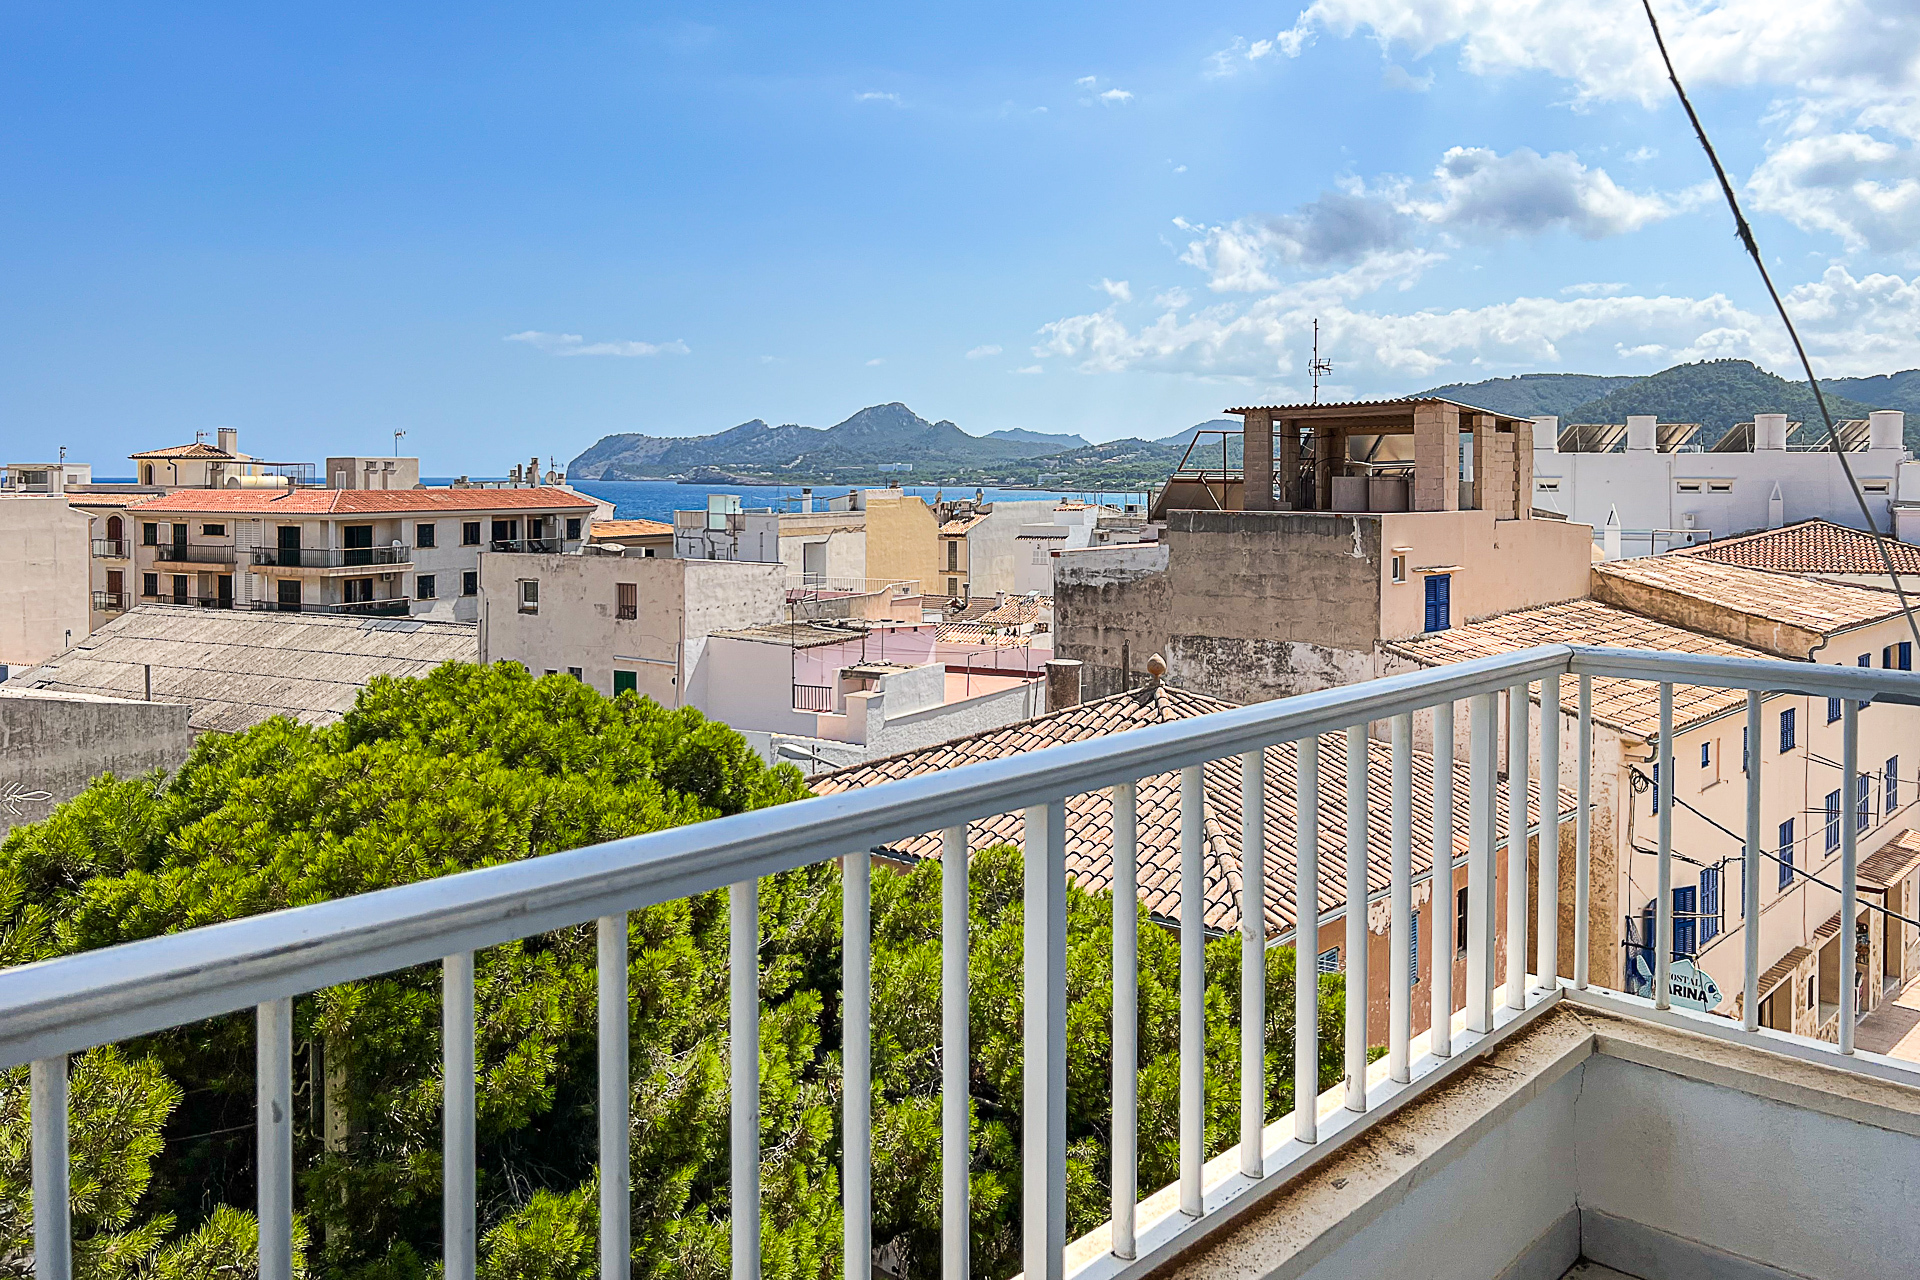 Flat with partial sea view and green surroundings near the harbour, 07590 Cala Ratjada (Spain), Apartment